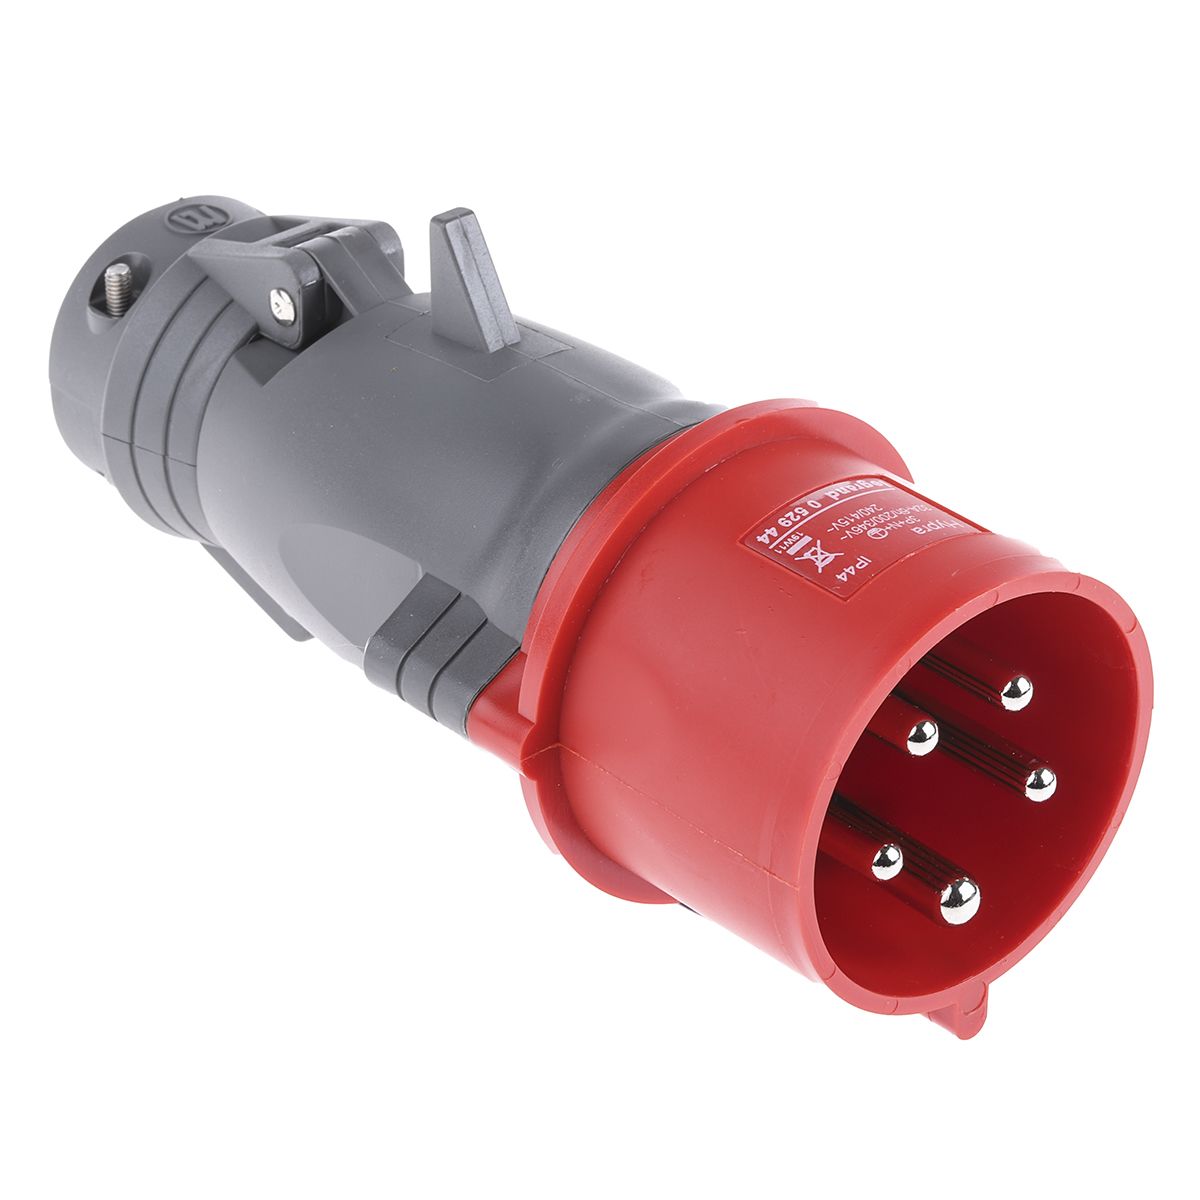 Legrand, HYPRA IP44 Red Cable Mount 3P+N+E Industrial Power Plug, Rated At 32A, 415 V